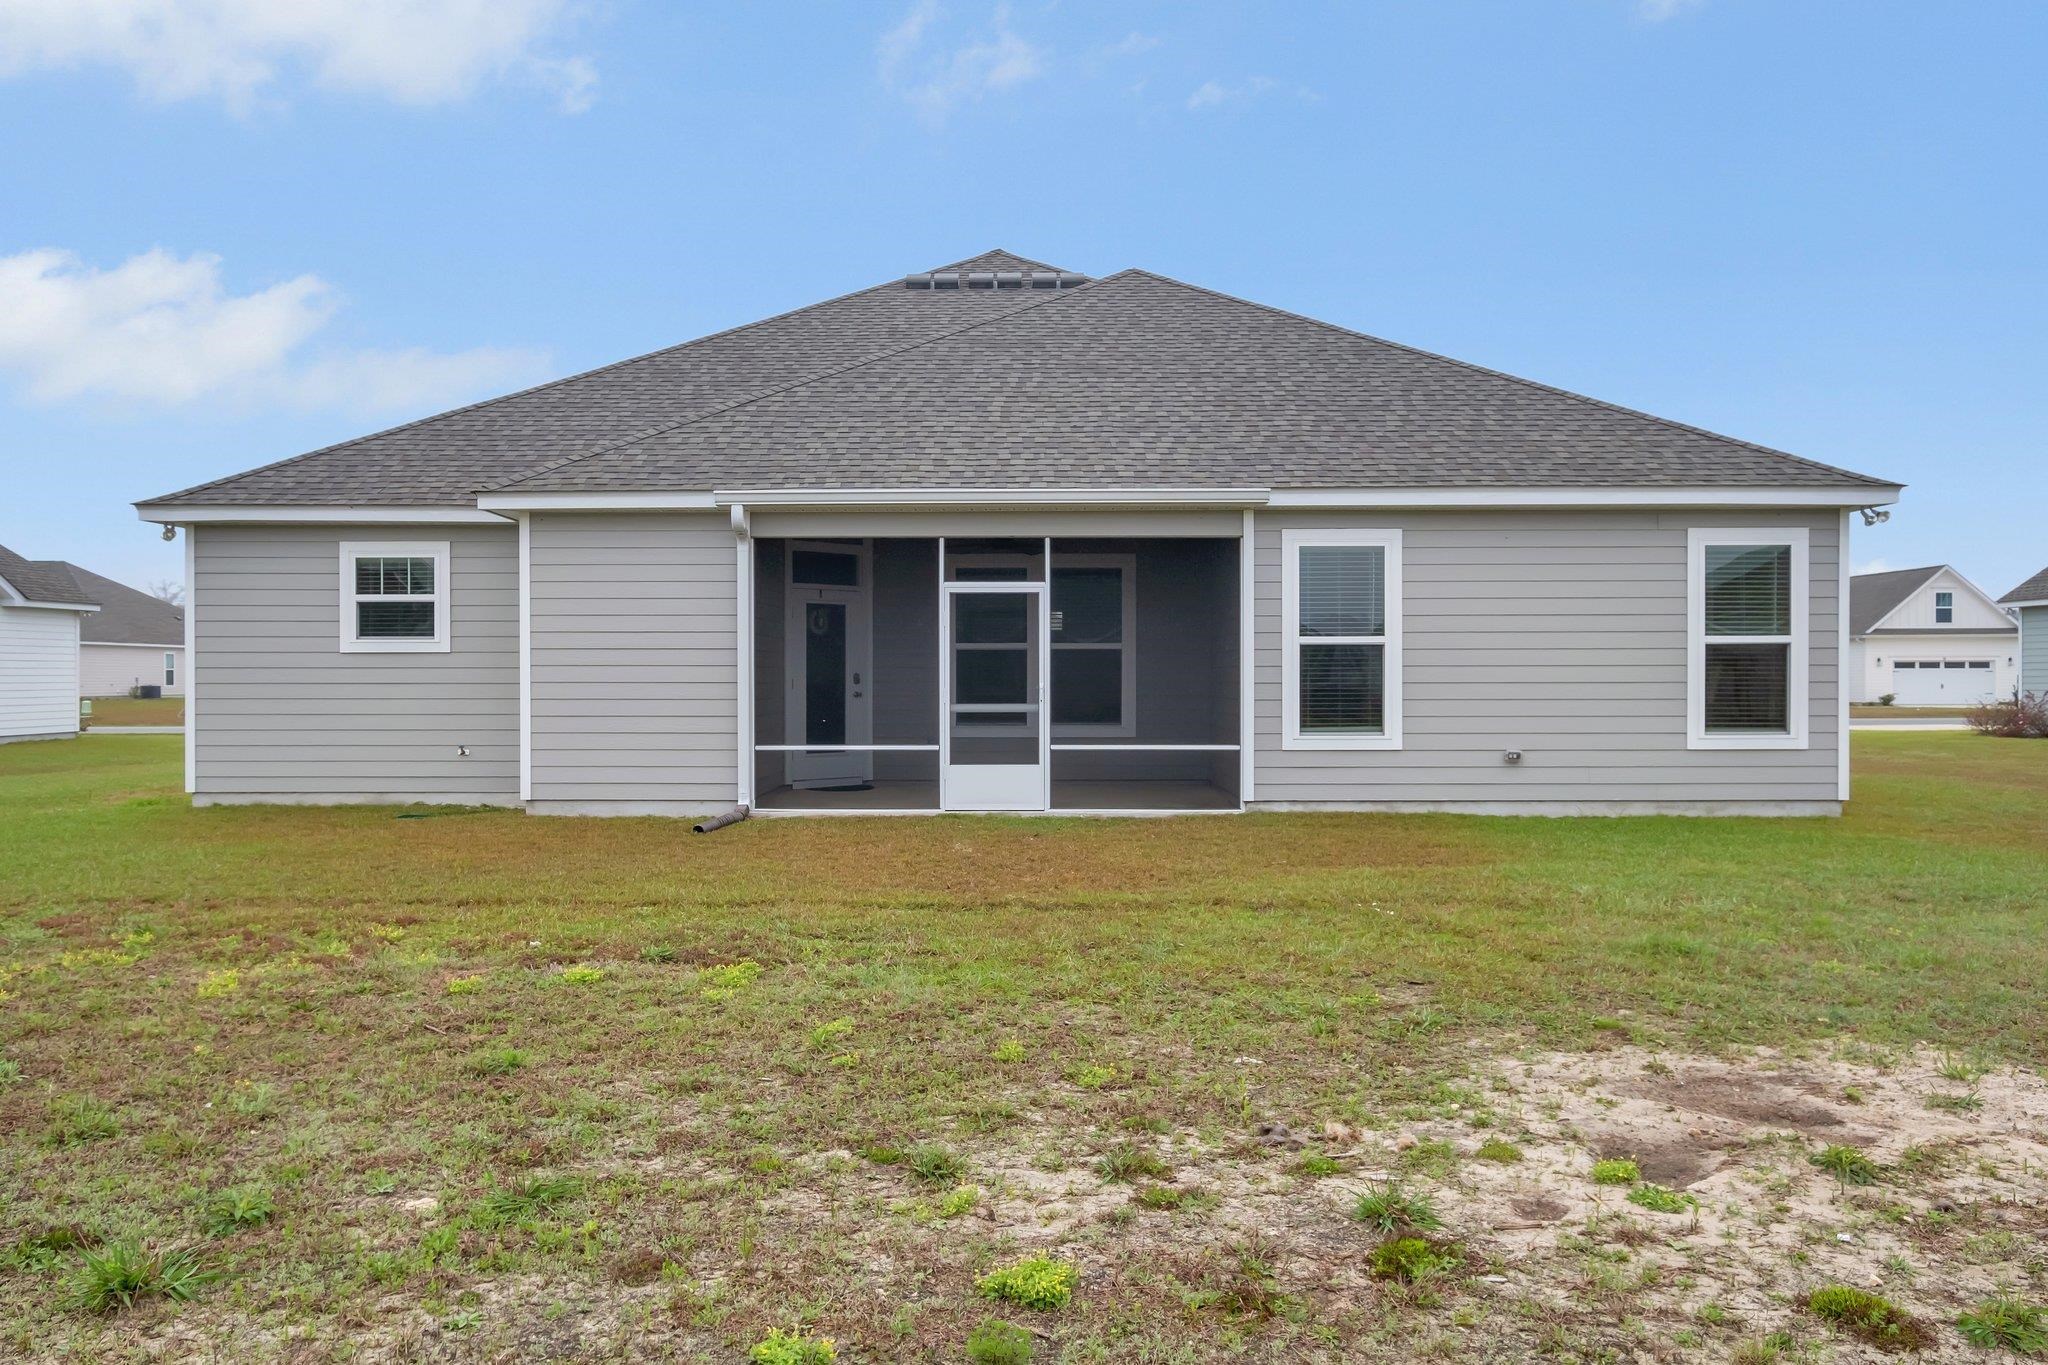 58 Shelby Drive,CRAWFORDVILLE,Florida 32327,4 Bedrooms Bedrooms,3 BathroomsBathrooms,Detached single family,58 Shelby Drive,369573